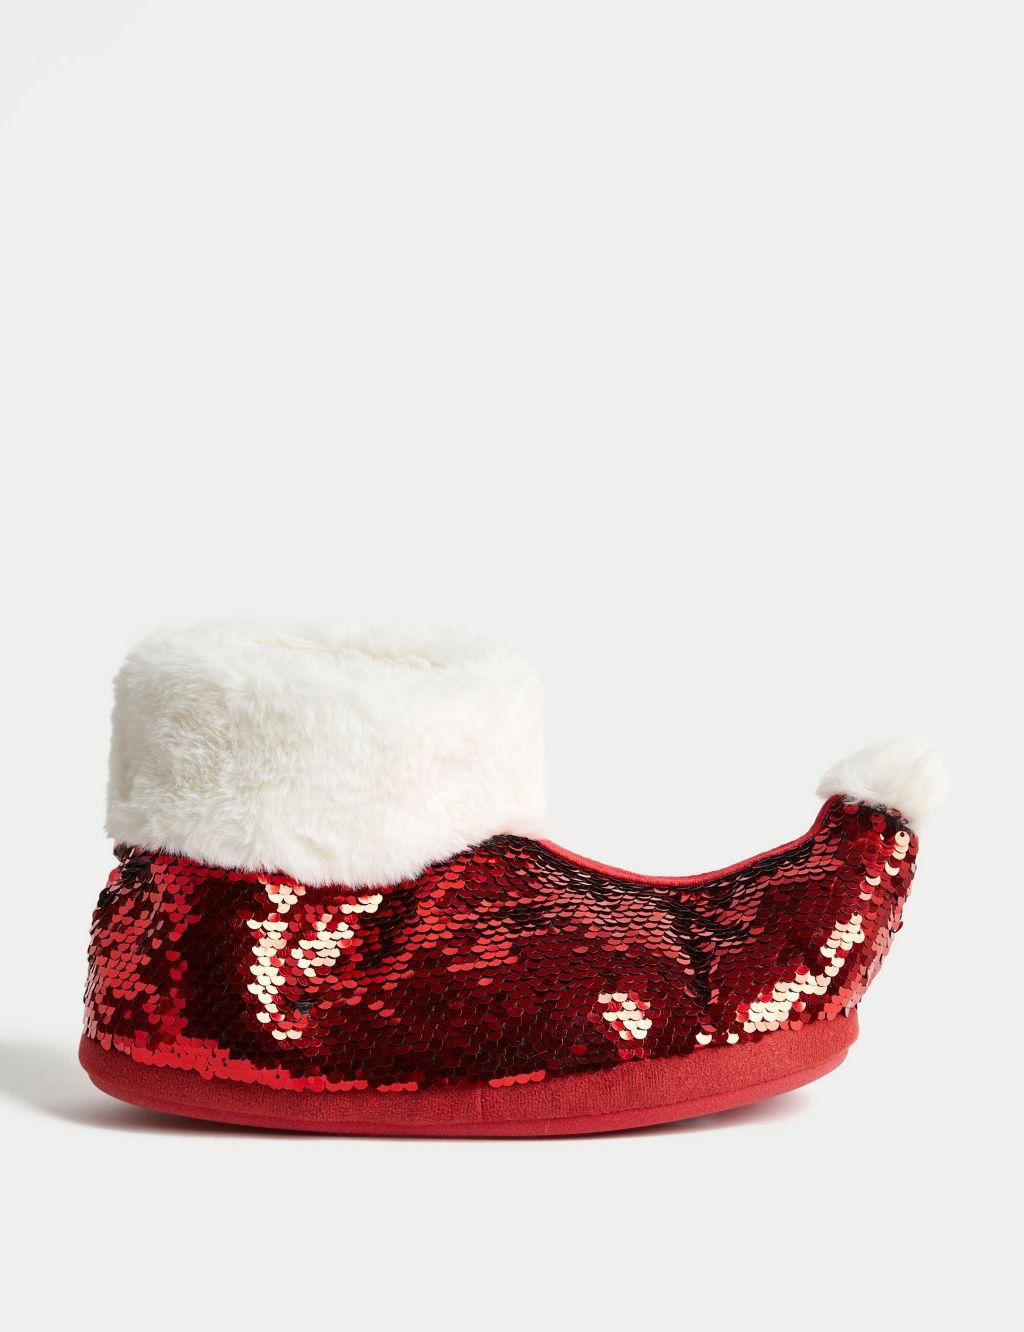 Kids' Christmas Sequin Slipper Boots (13 Small - 6 Large) image 1